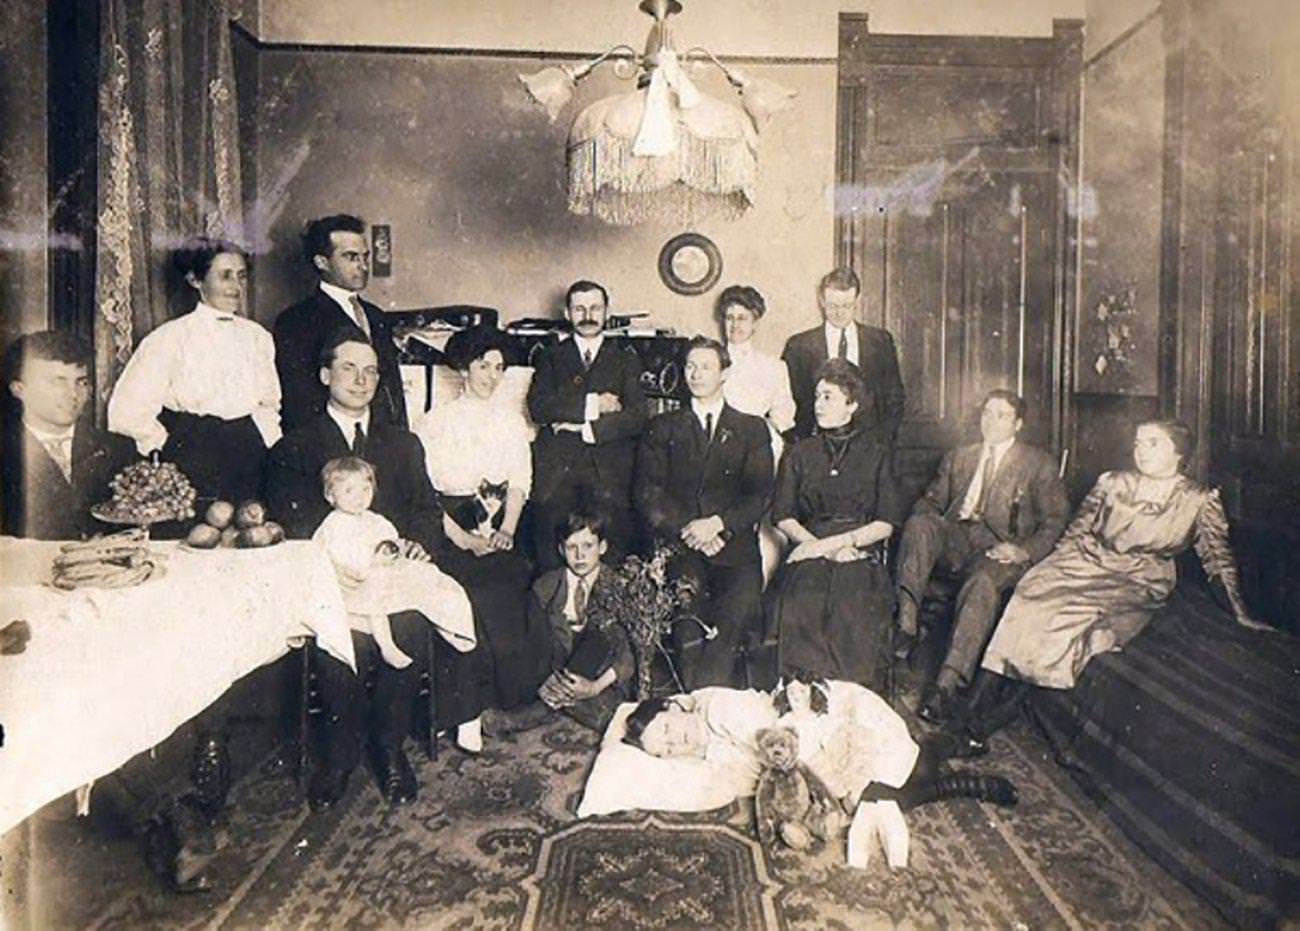 Dead girl is is lying on the floor of the parlor surrounded by family members.